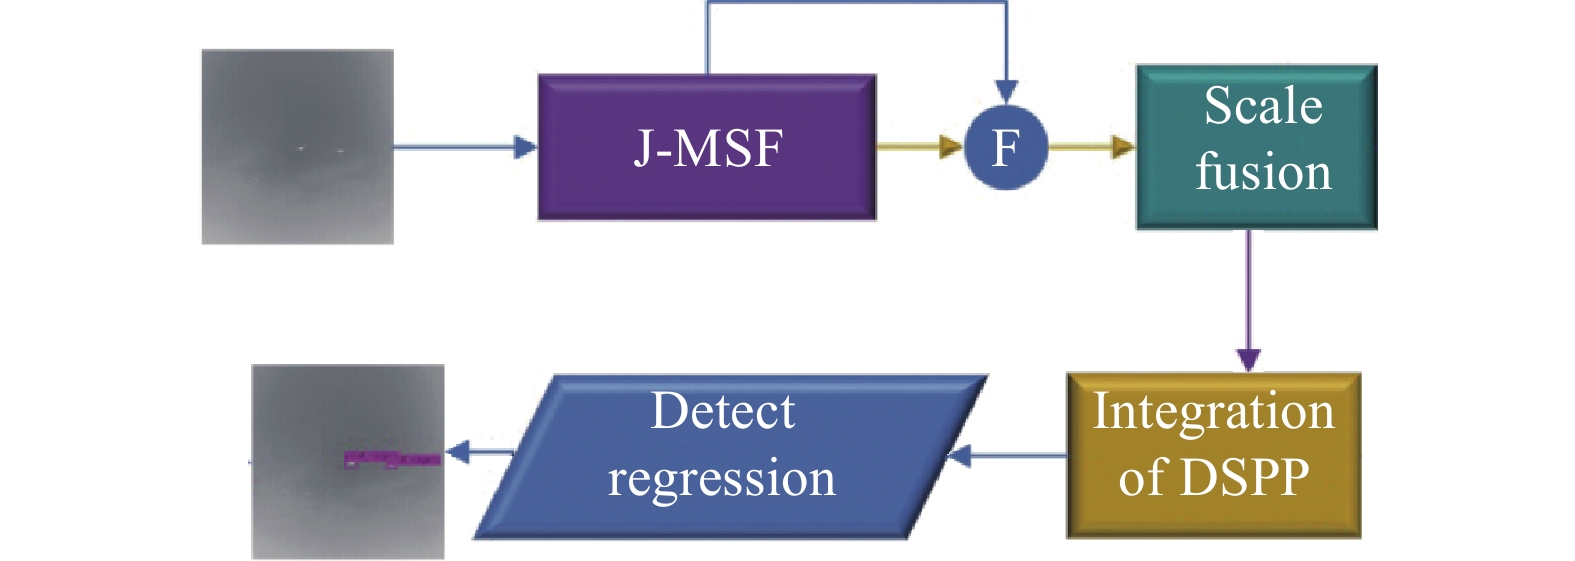 Detection flow chart of J-MSF